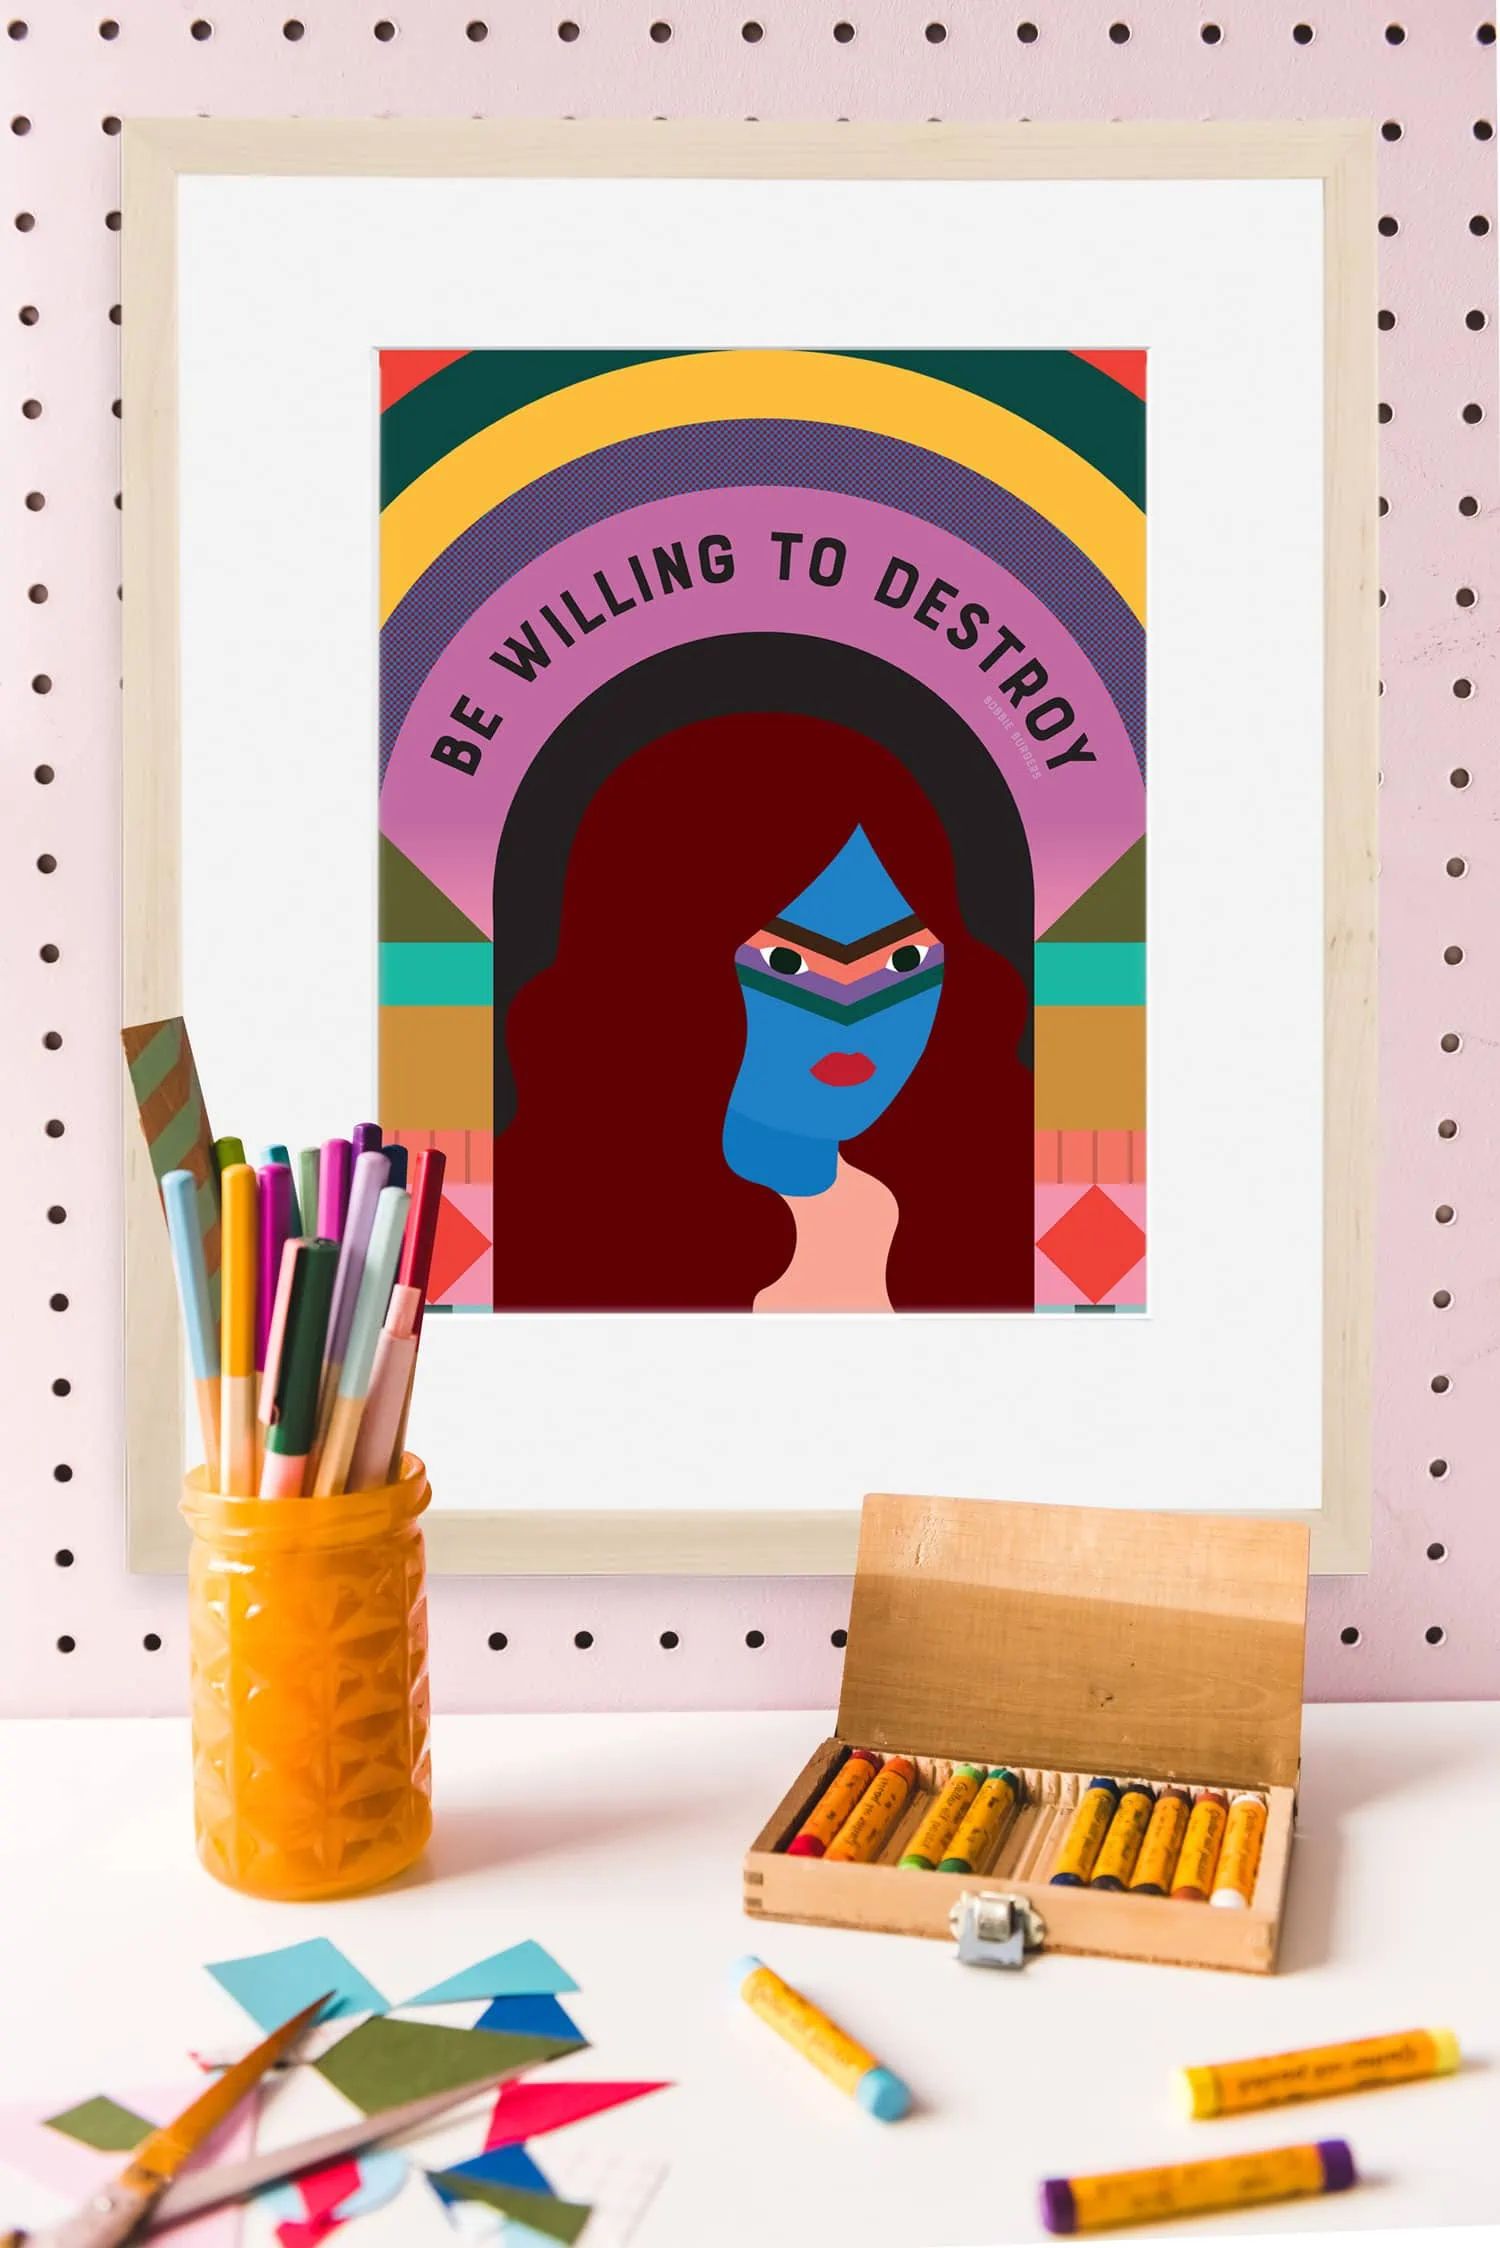 Graphic portrait of a woman with the text "be willing to destroy" among art supplies on a pink wall